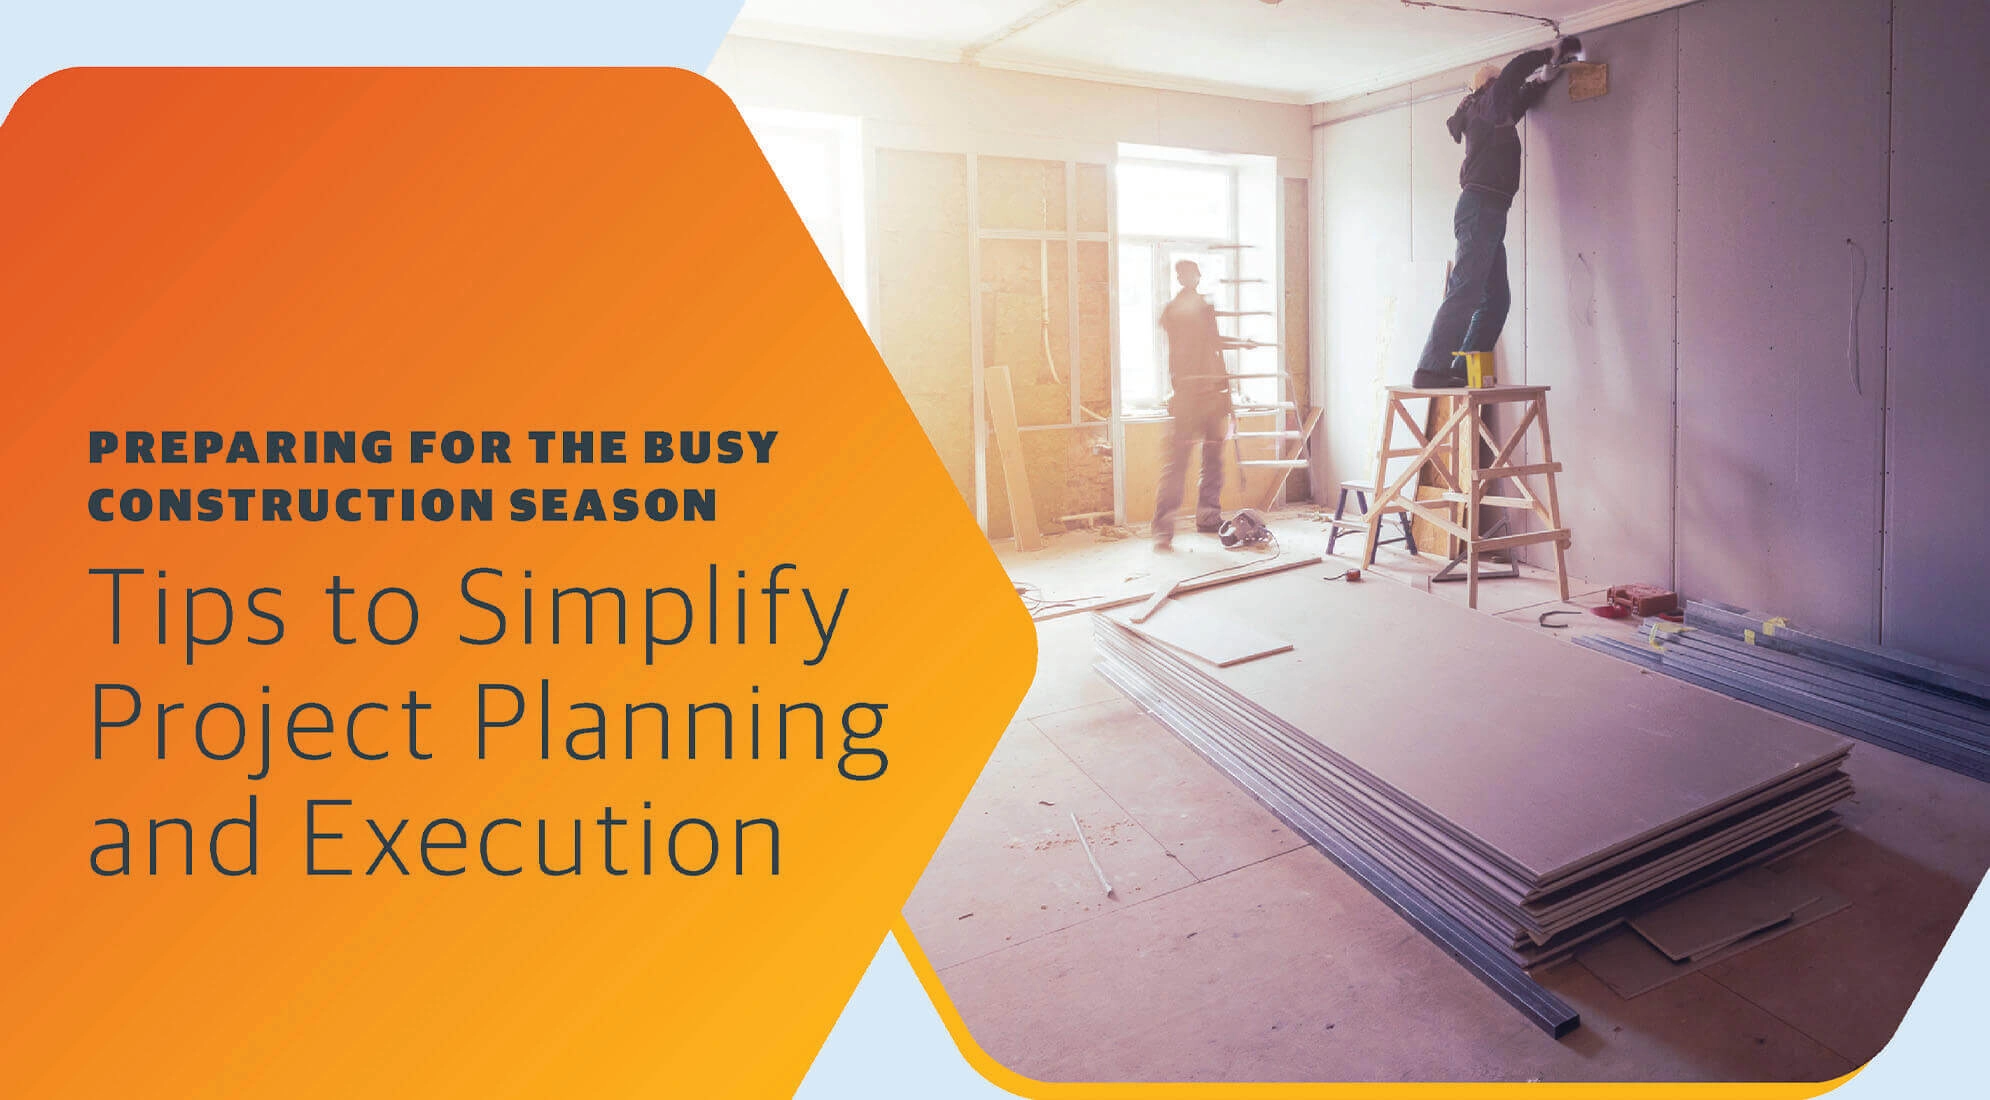 Tips to Simplify Construction Project Planning and Execution 1